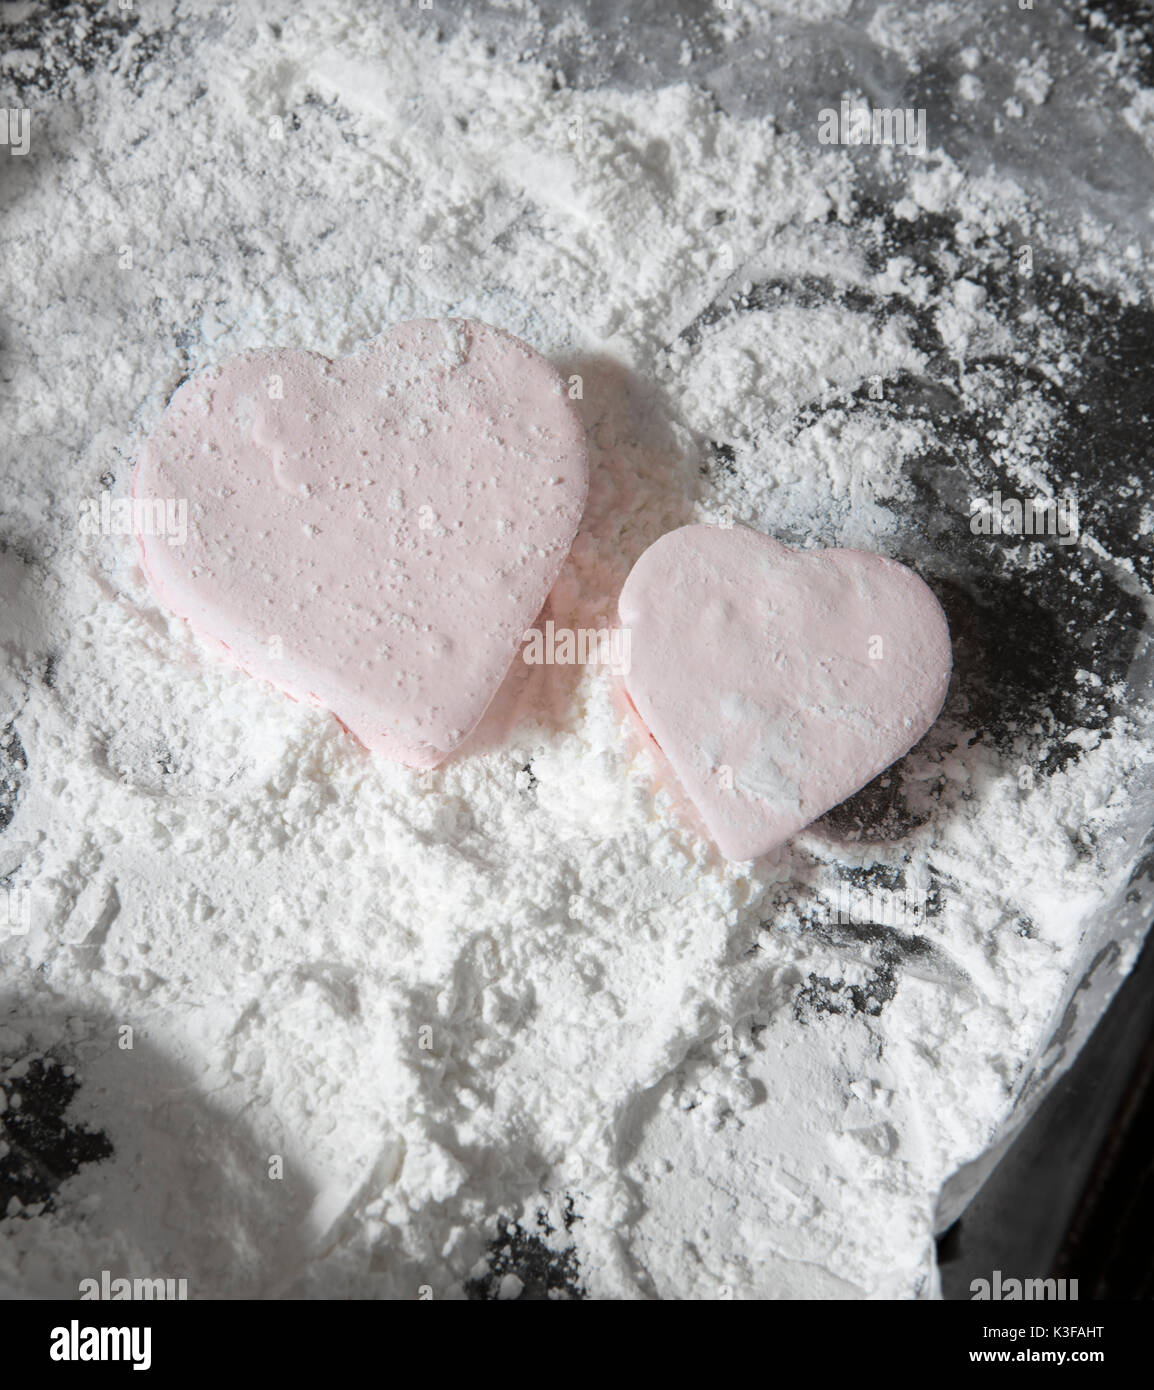 White and pink heart-shaped marshmallows on a saucer on a pink background  13731157 Stock Photo at Vecteezy